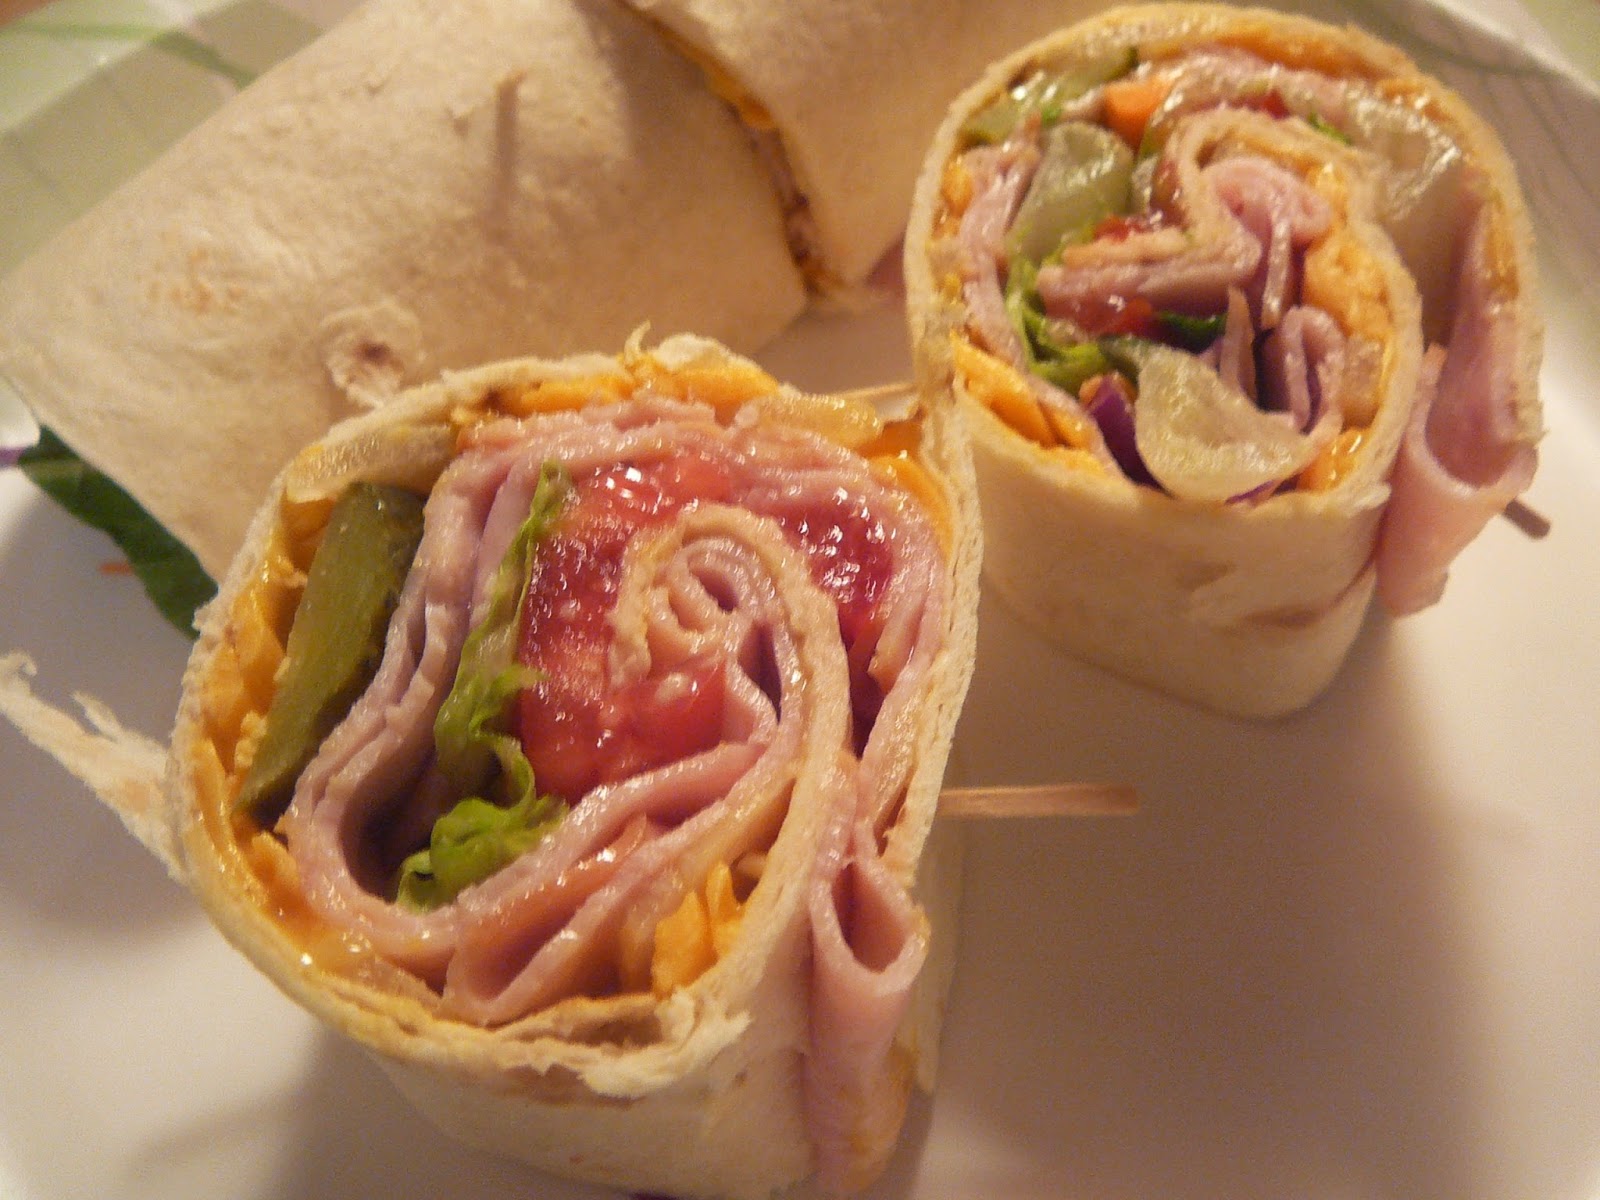 make your own turkey roll ups at home, just like the costco version! 